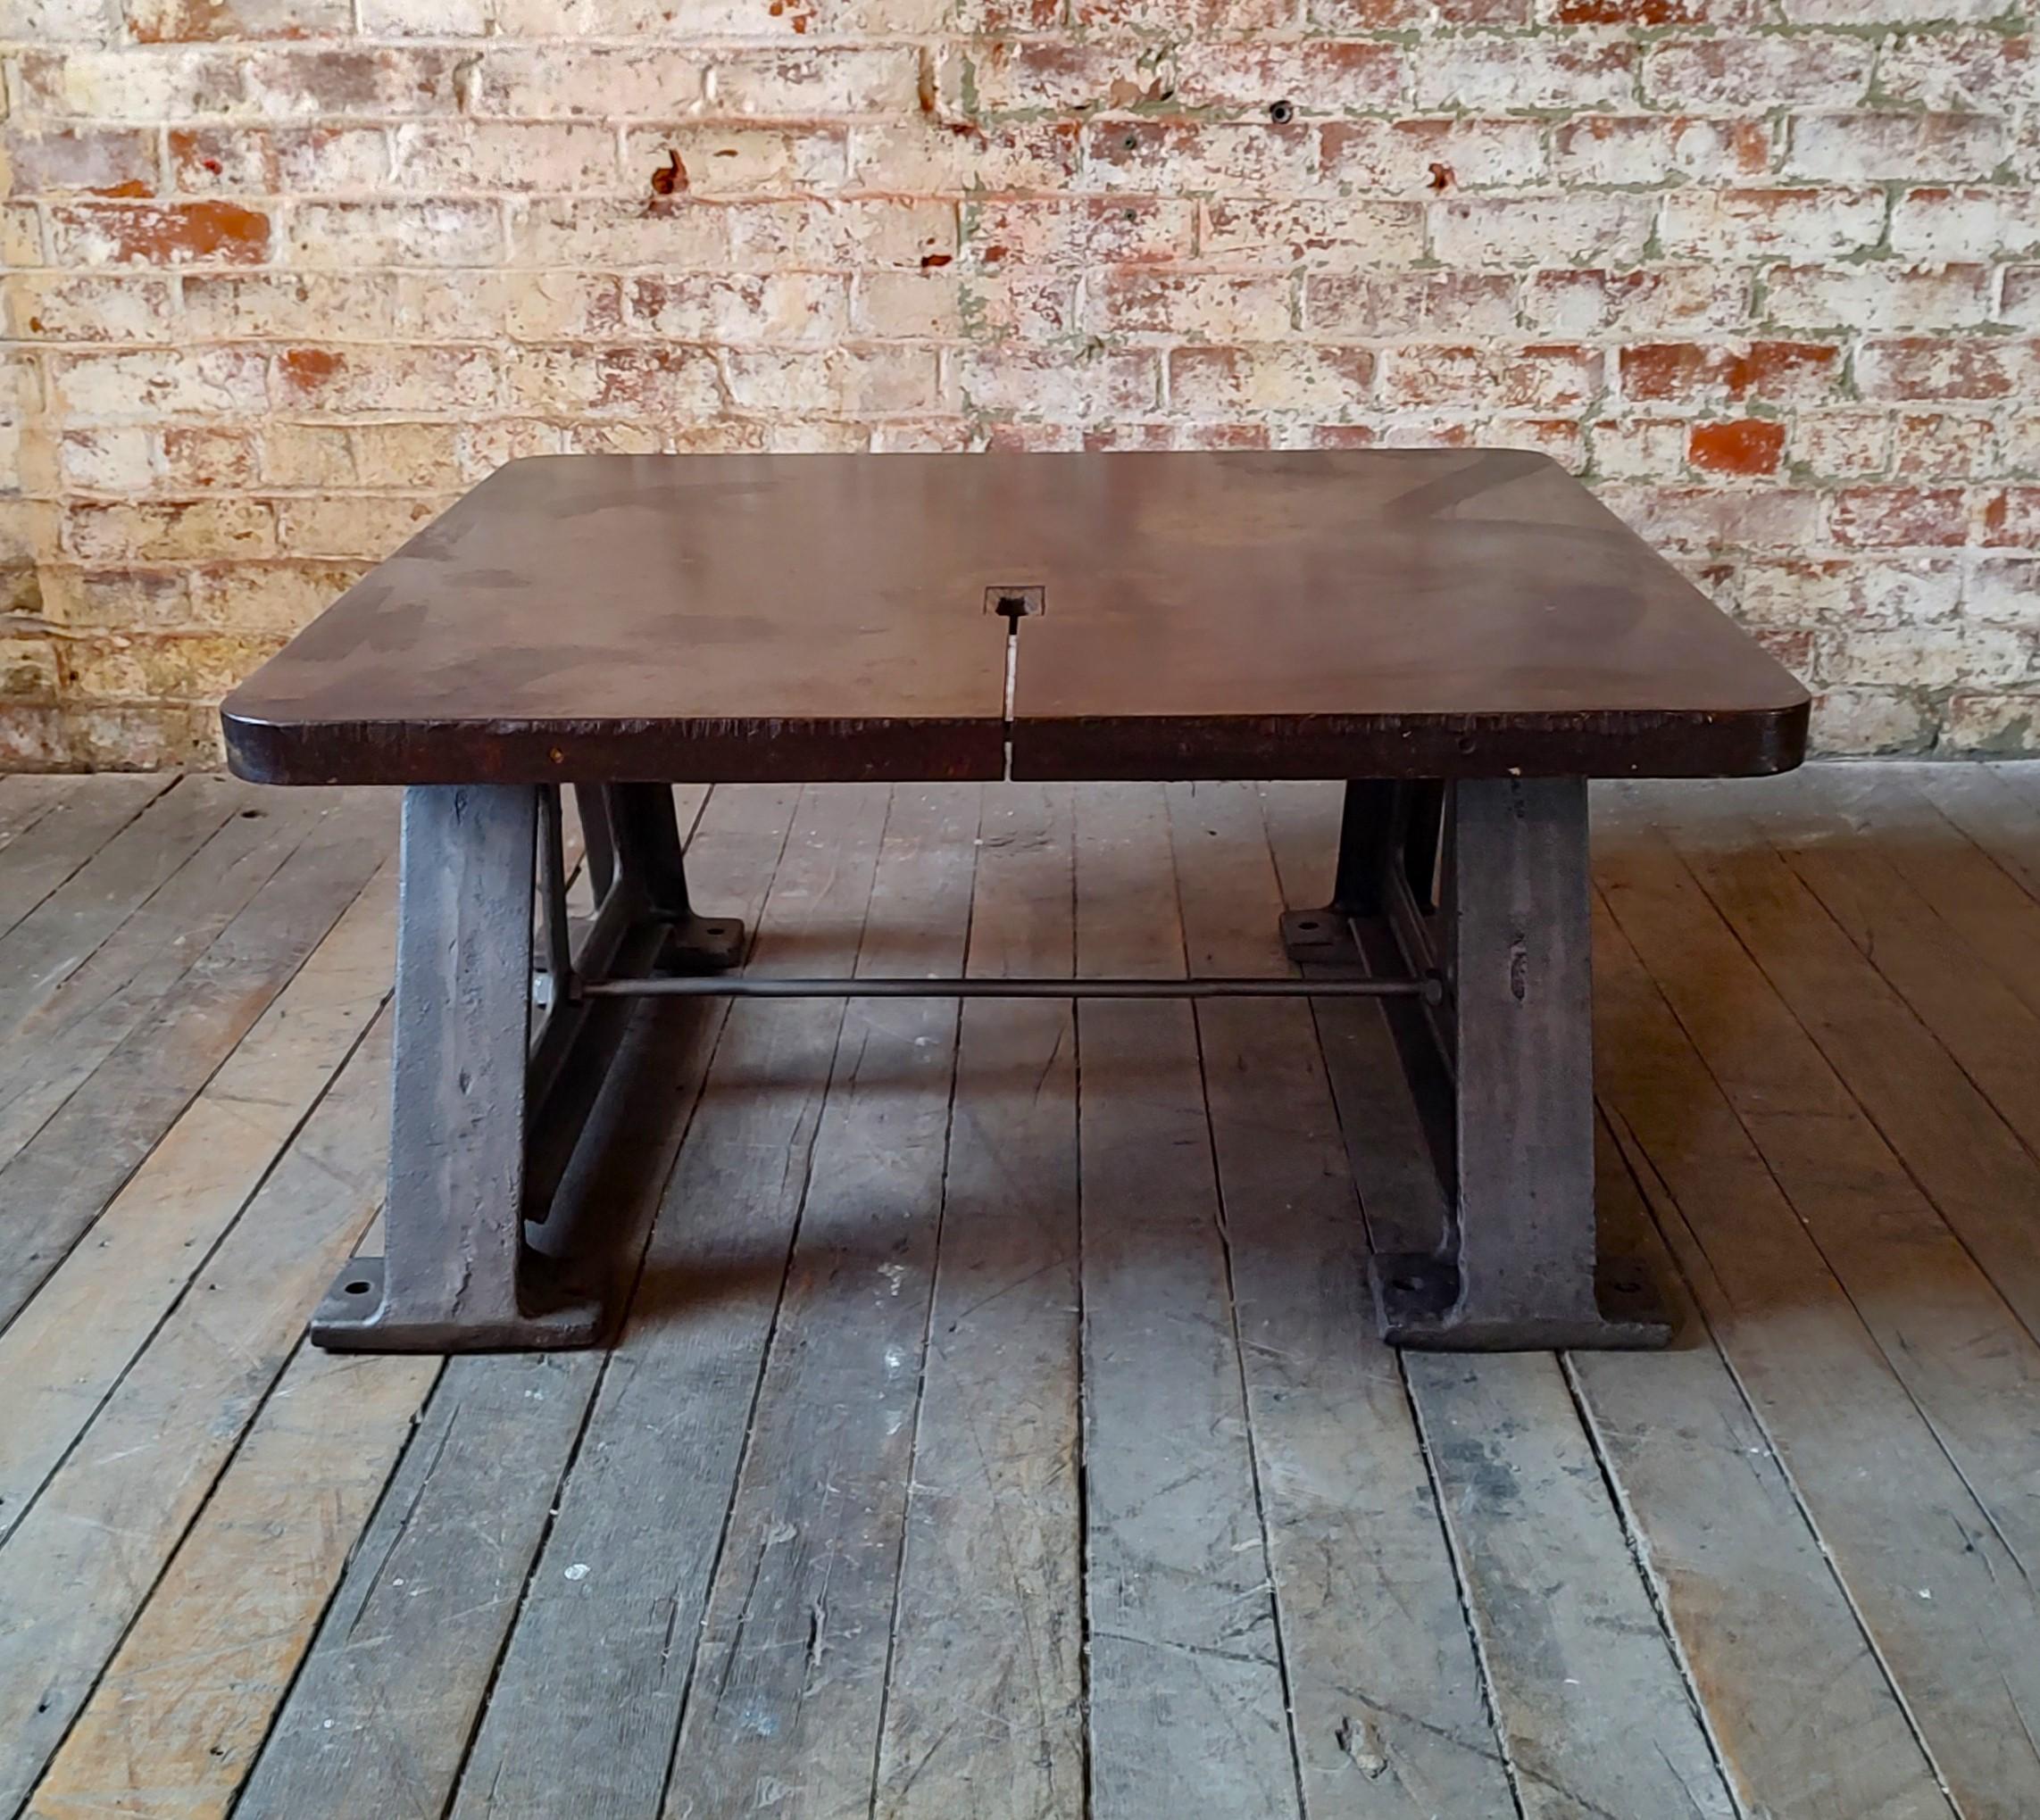 Low cast iron industrial table.

Overall Dimensions: 32